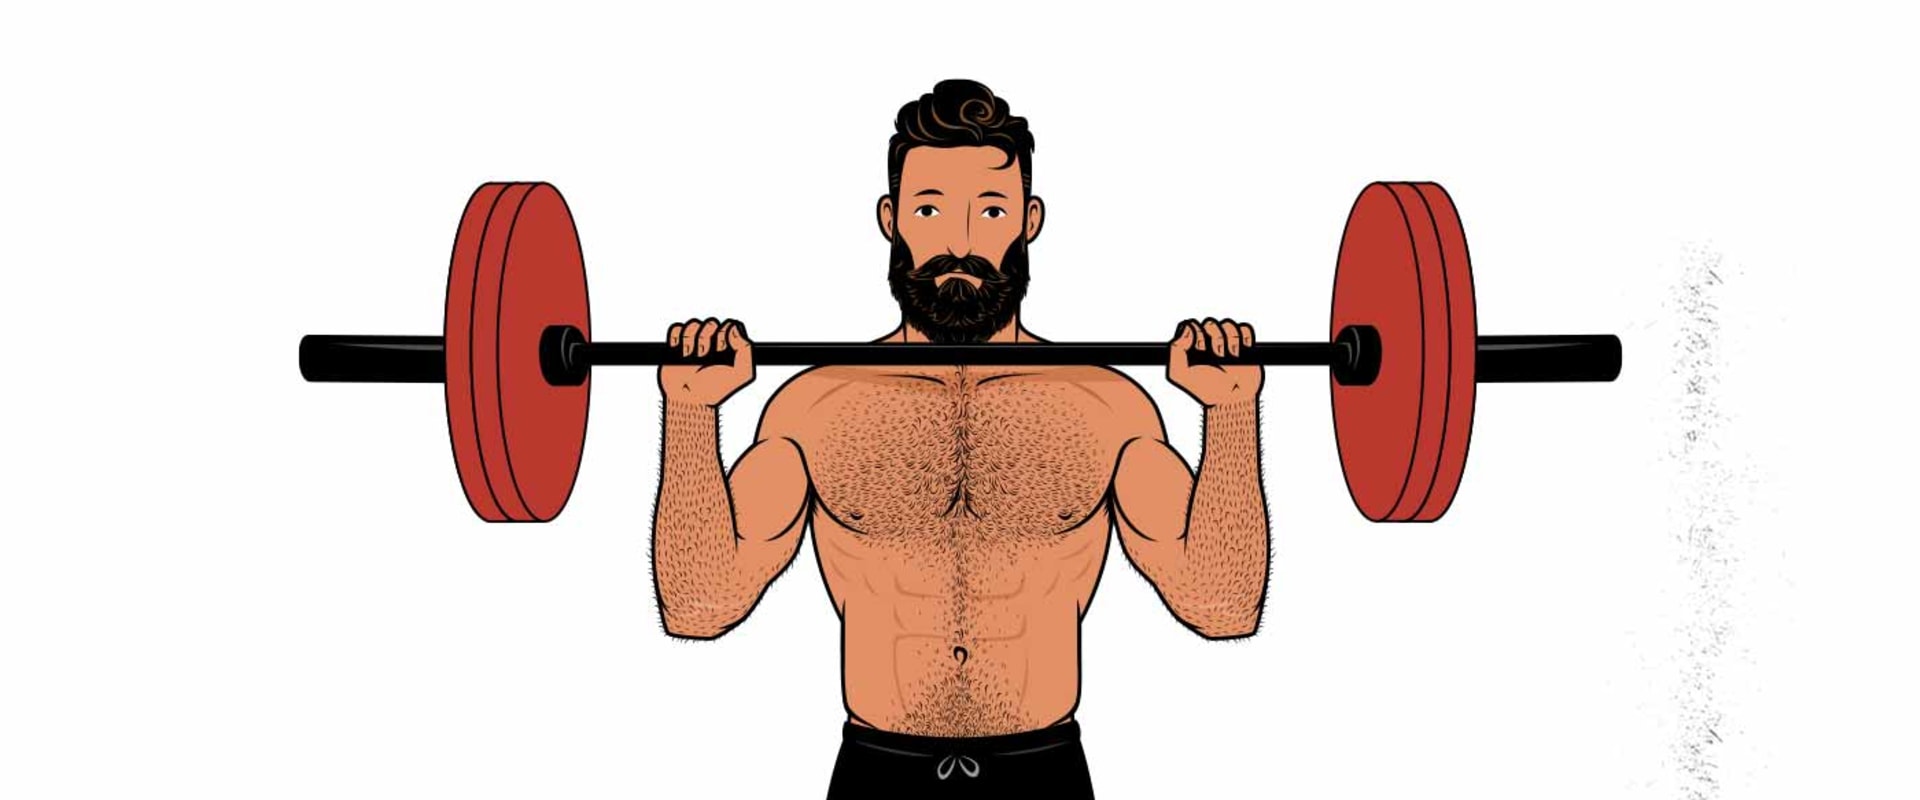 Overhead Press: What You Need to Know